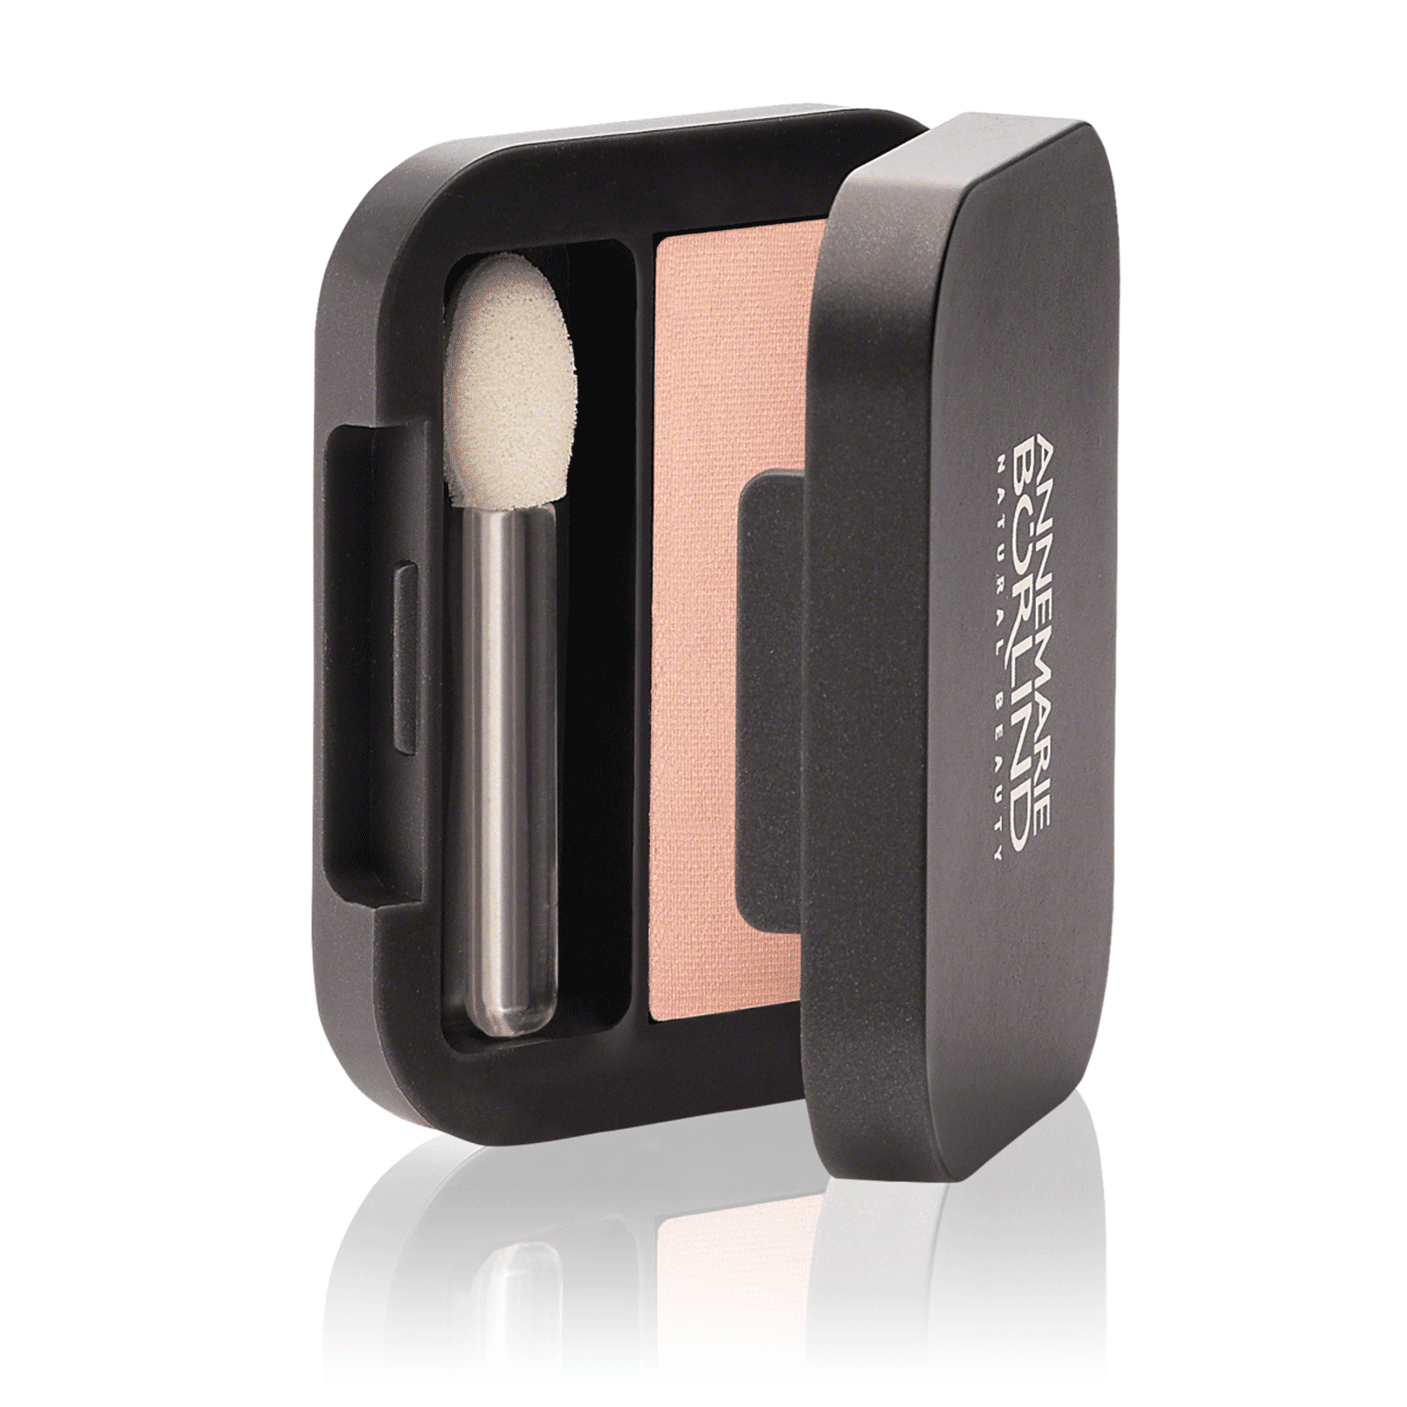 Annemarie Borlind Powder Eye Shadow Apricot 2g (Discontinued- Replacement Coming Soon)